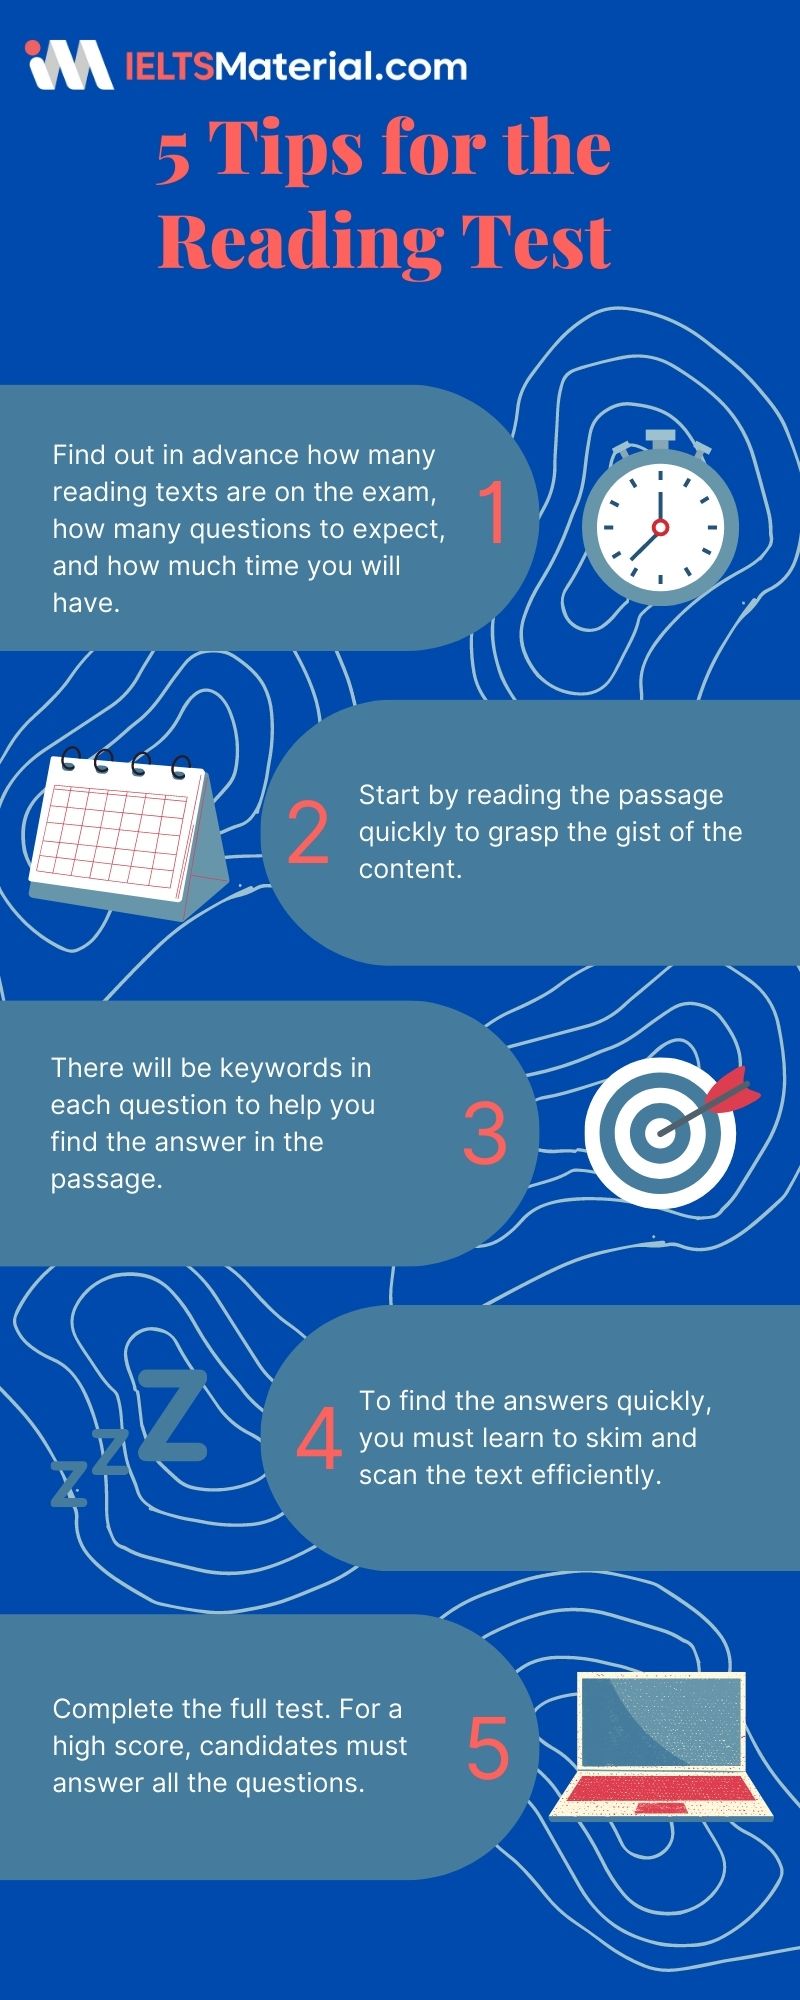 reading test tips infographic